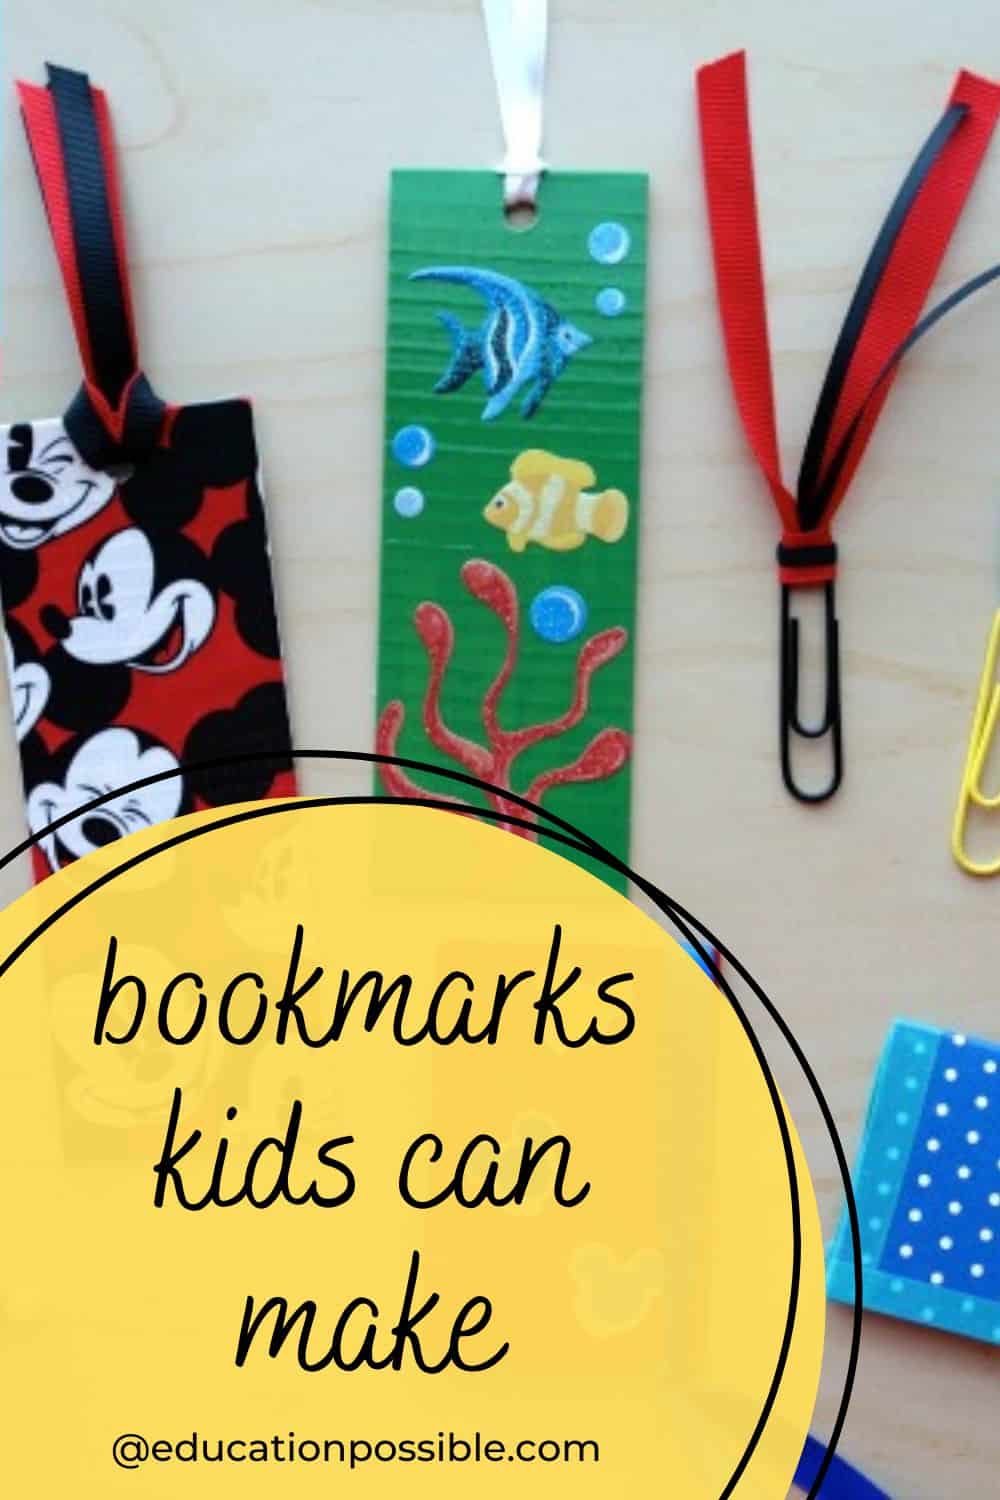 Homemade bookmarks on a table